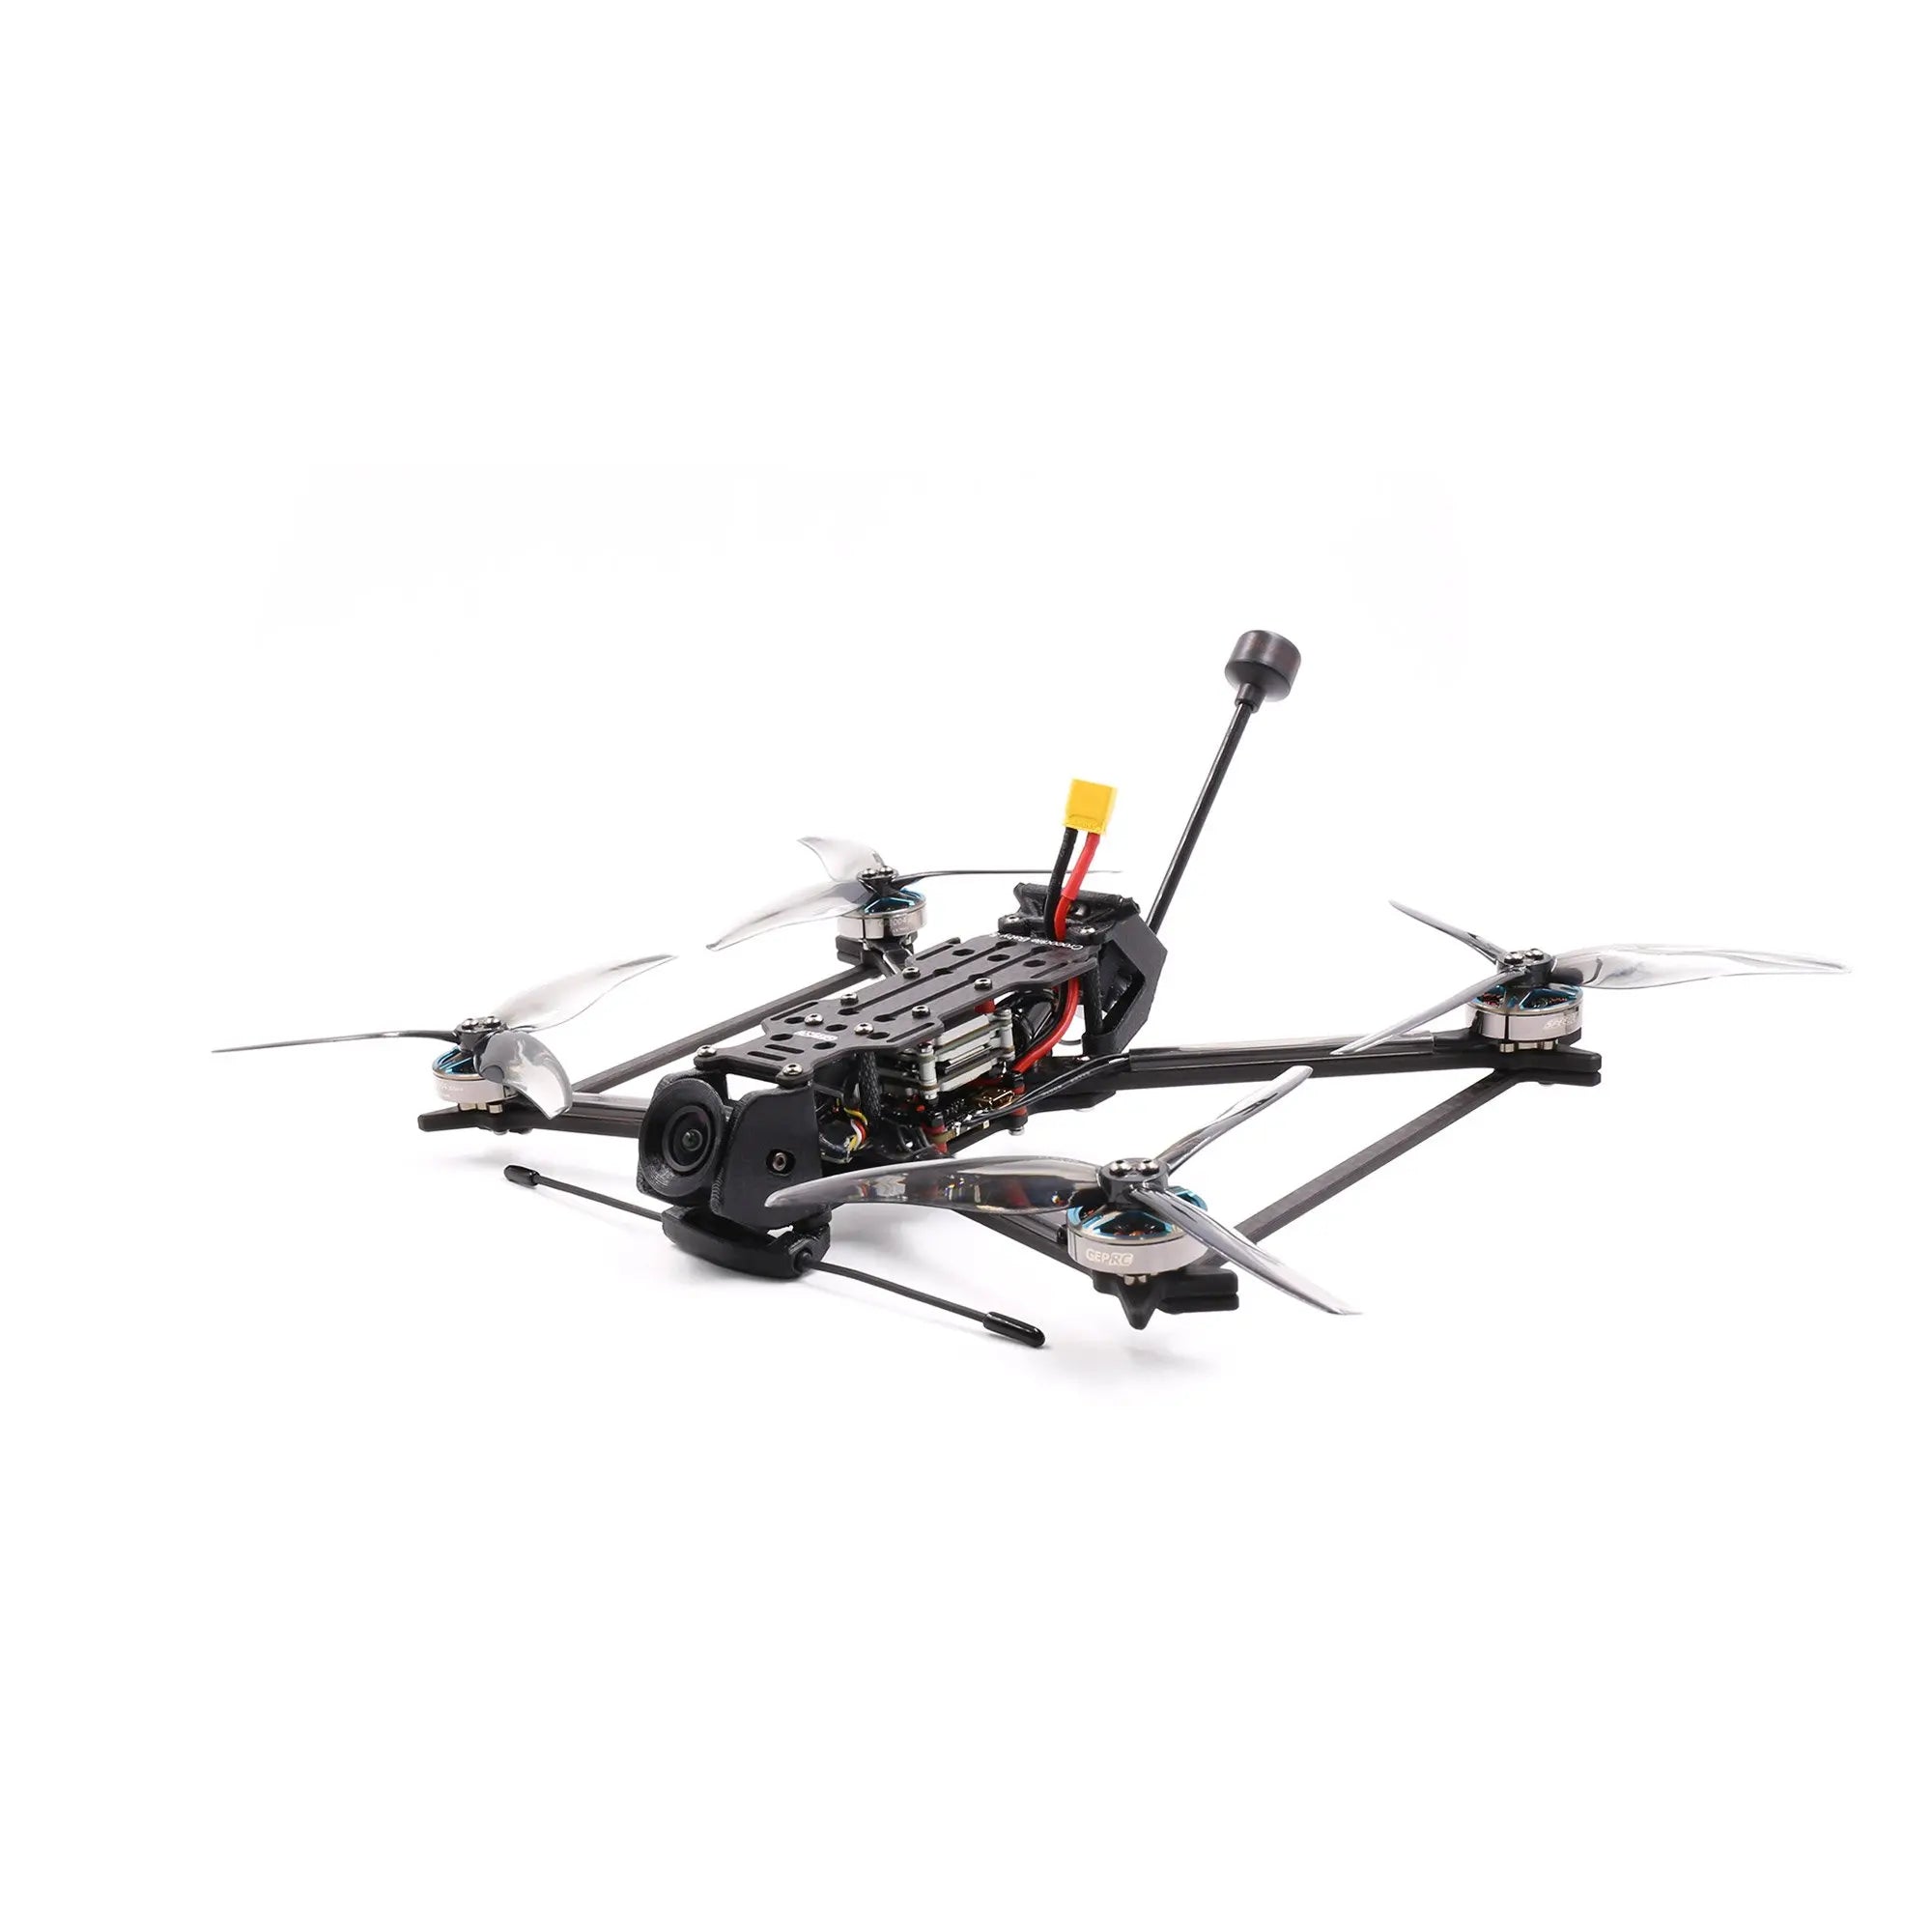 GEPRC Crocodile5 Baby FPV Drone, pilots can adjust parameters such as motor KV and propeller size to match their preferred flight